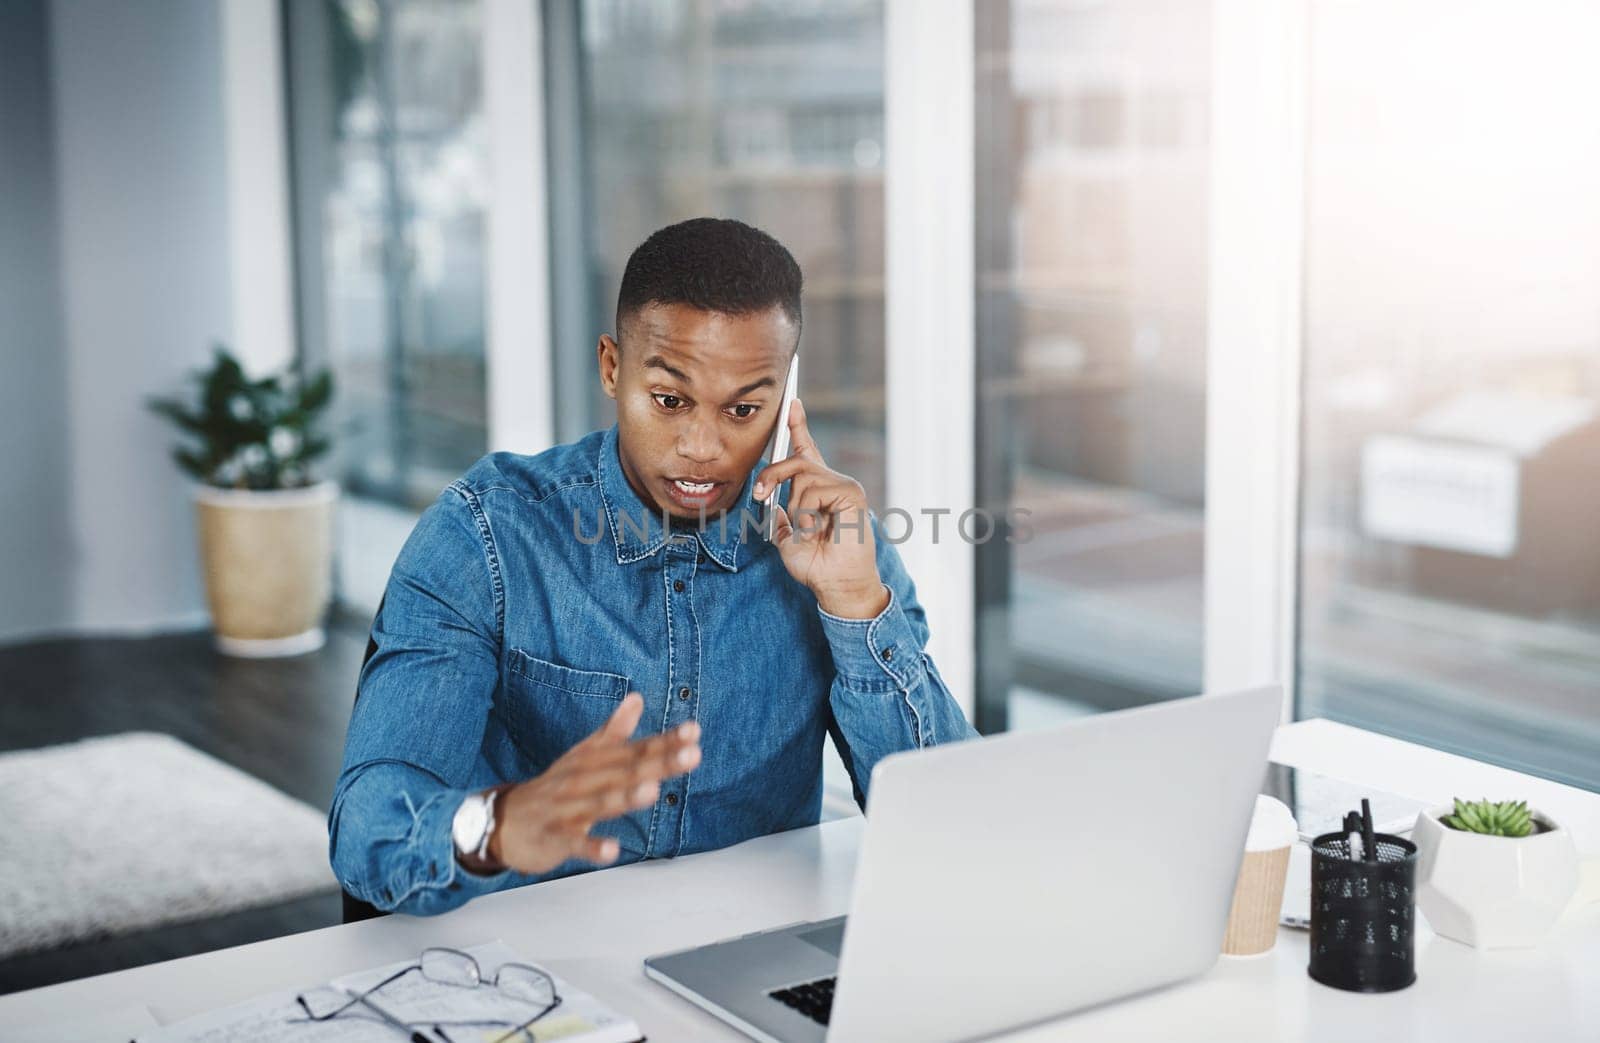 Discussion, phone call and black man by computer in office, workspace and desk happy in creative career. Communication, internship and journalist with tech for contact, research and internet.